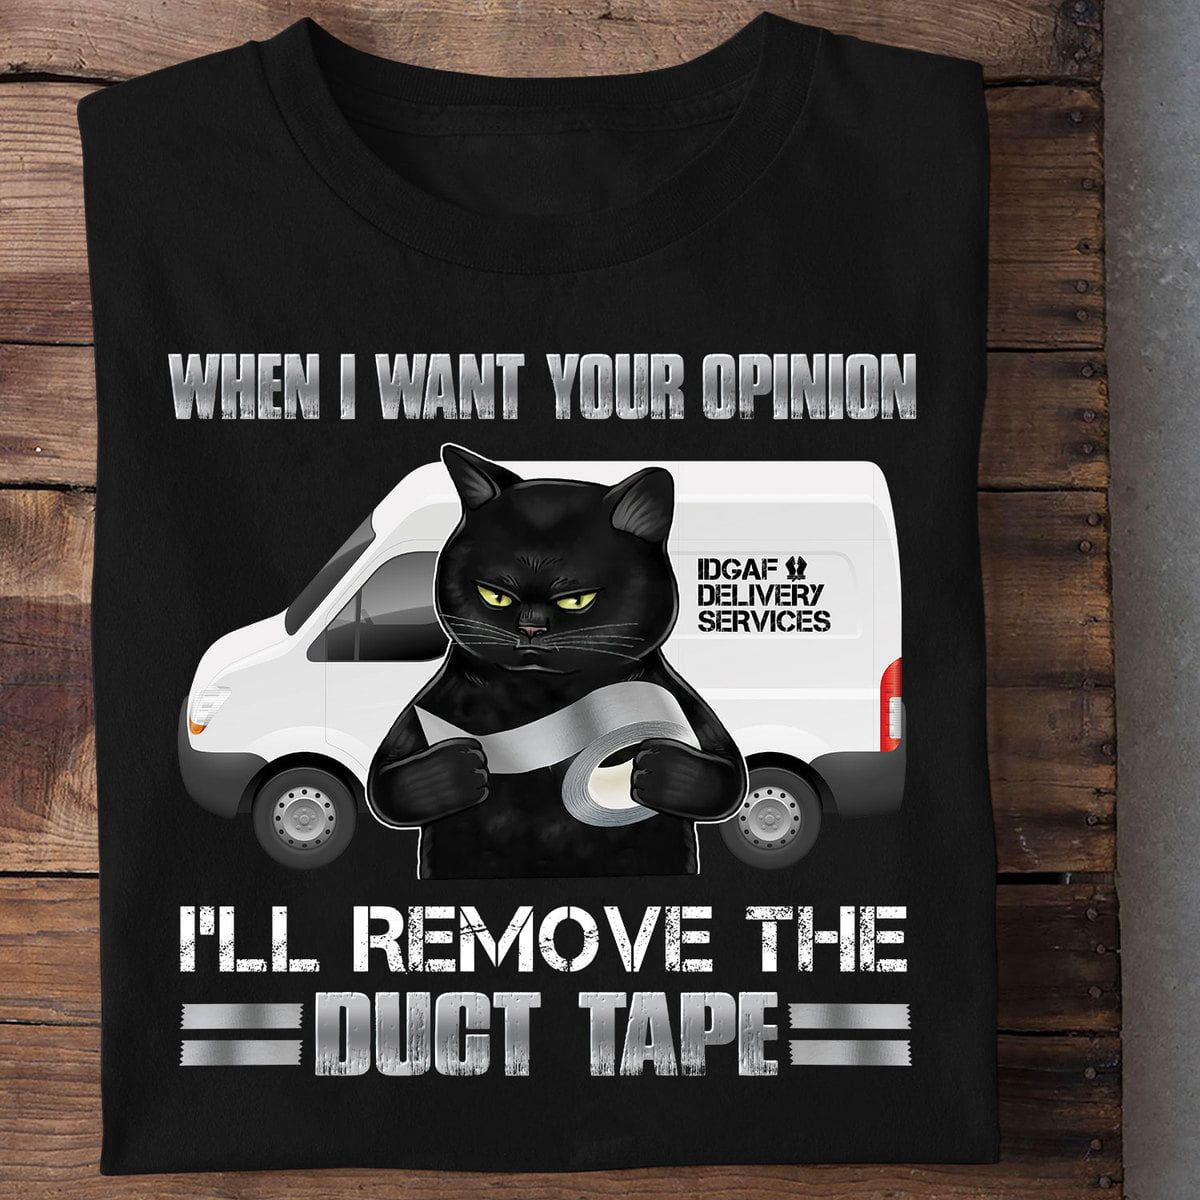 Black Cat And Duct Tape, Idgaf Delivery Services - When i want your opinion i'll remove the duct tape